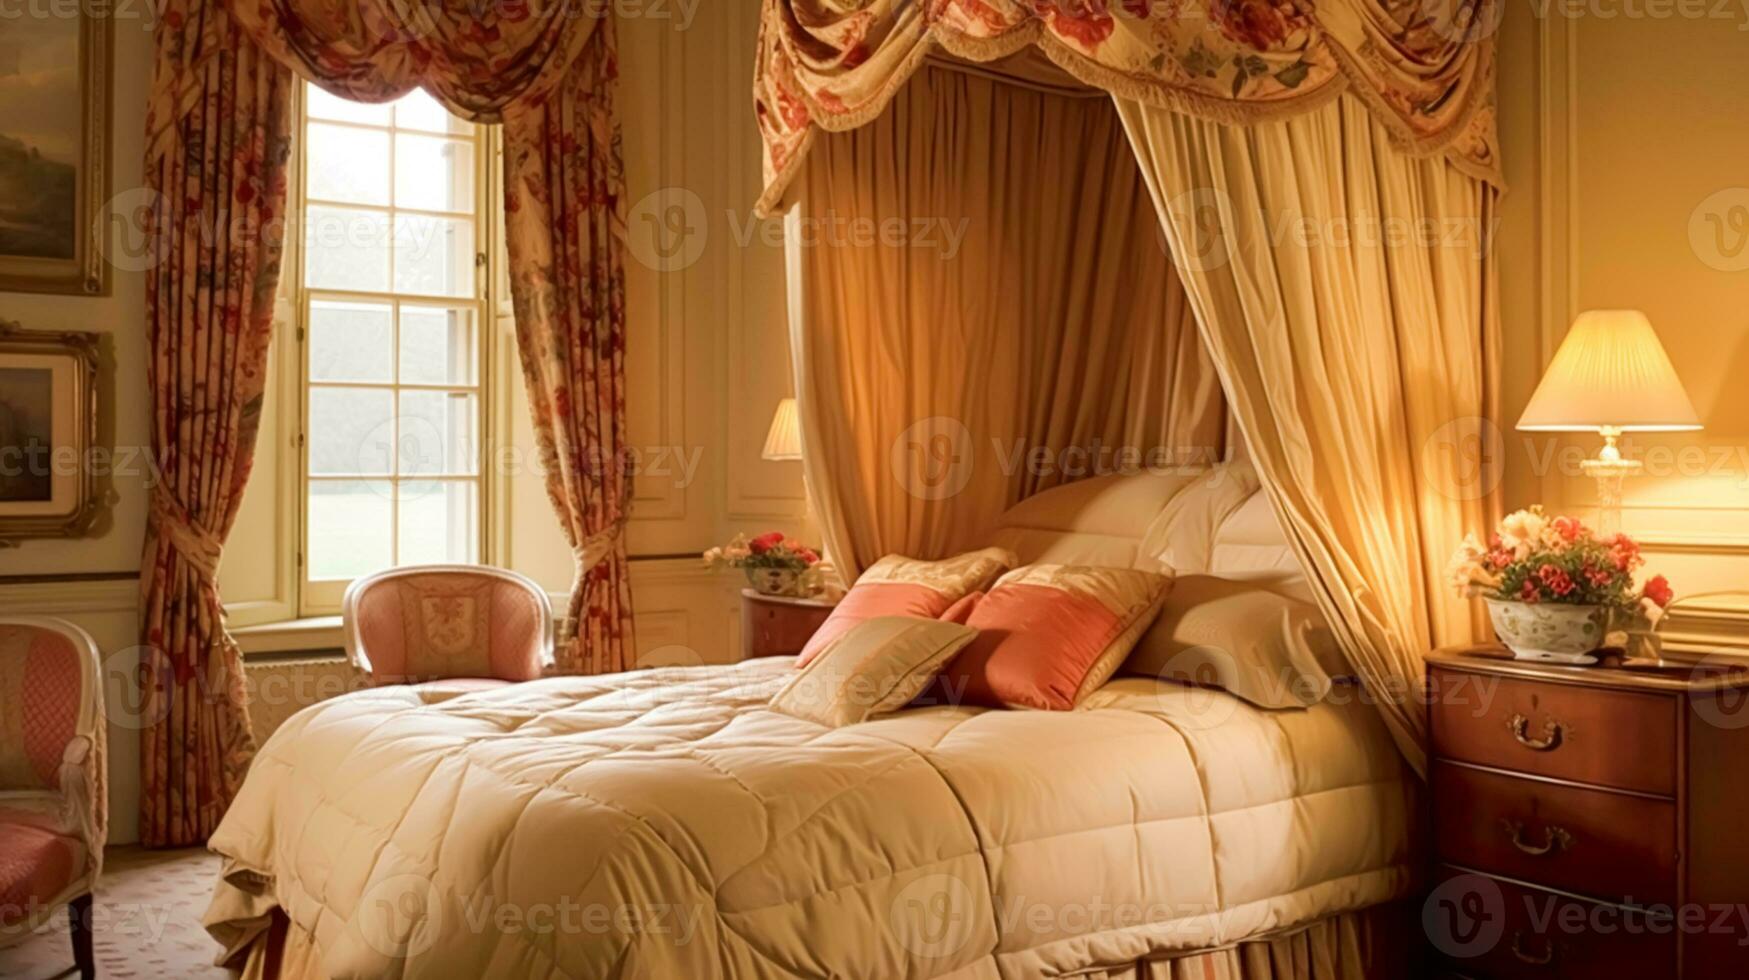 Bedroom decor, interior design and autumnal home decor, bed with silk satin bedding, bespoke furniture and autumn decoration, English country house, holiday rental and cottage style photo